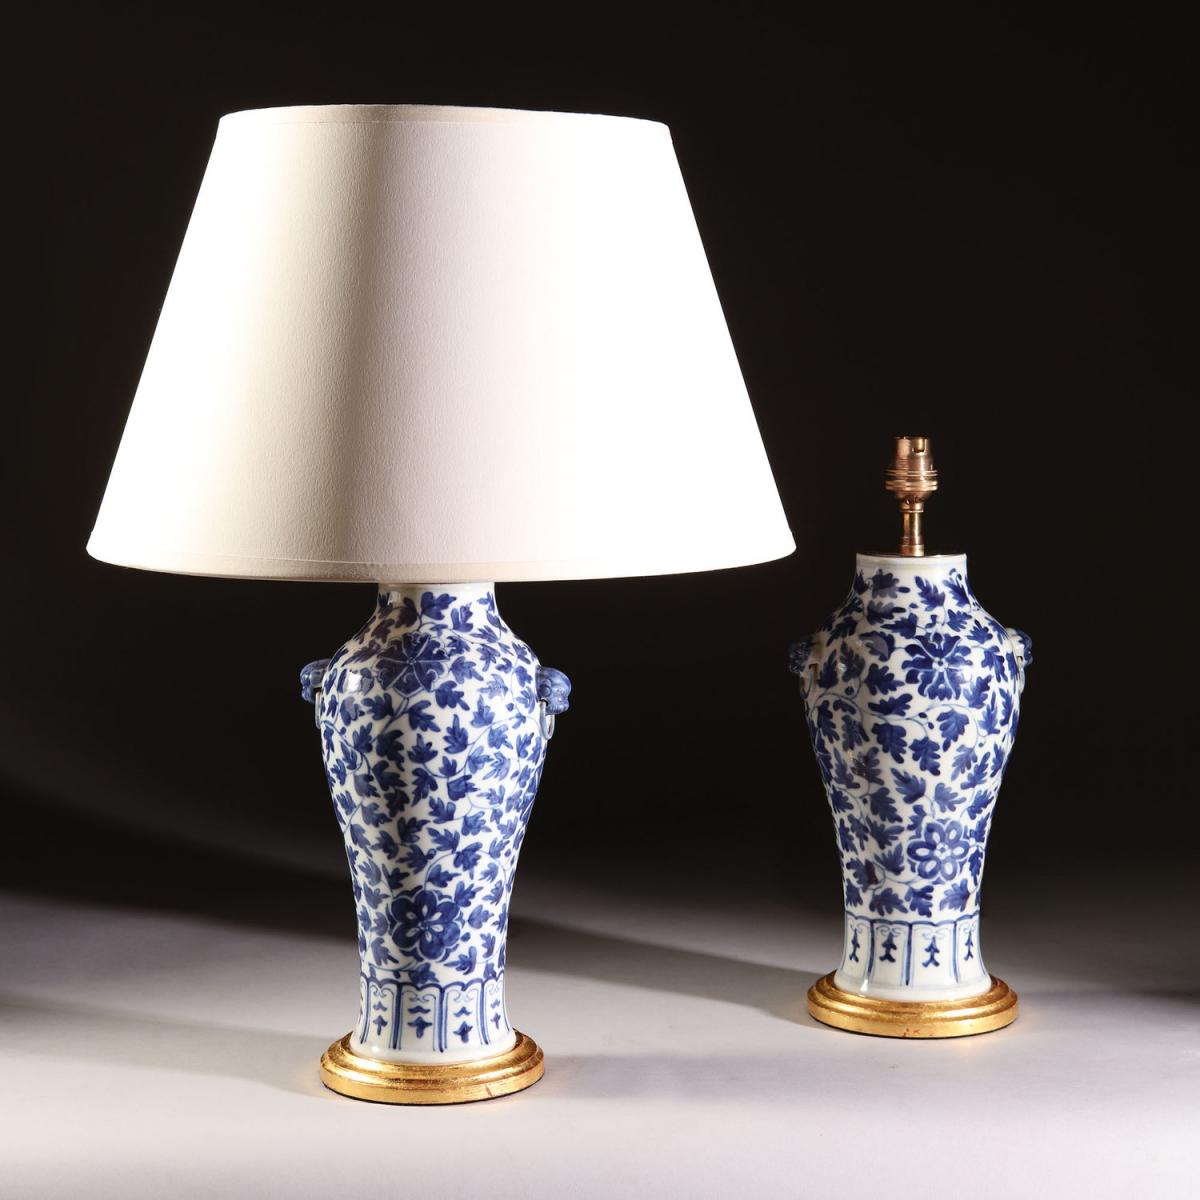 A Pair of Late 19th Century Blue and White Chinese Lamps